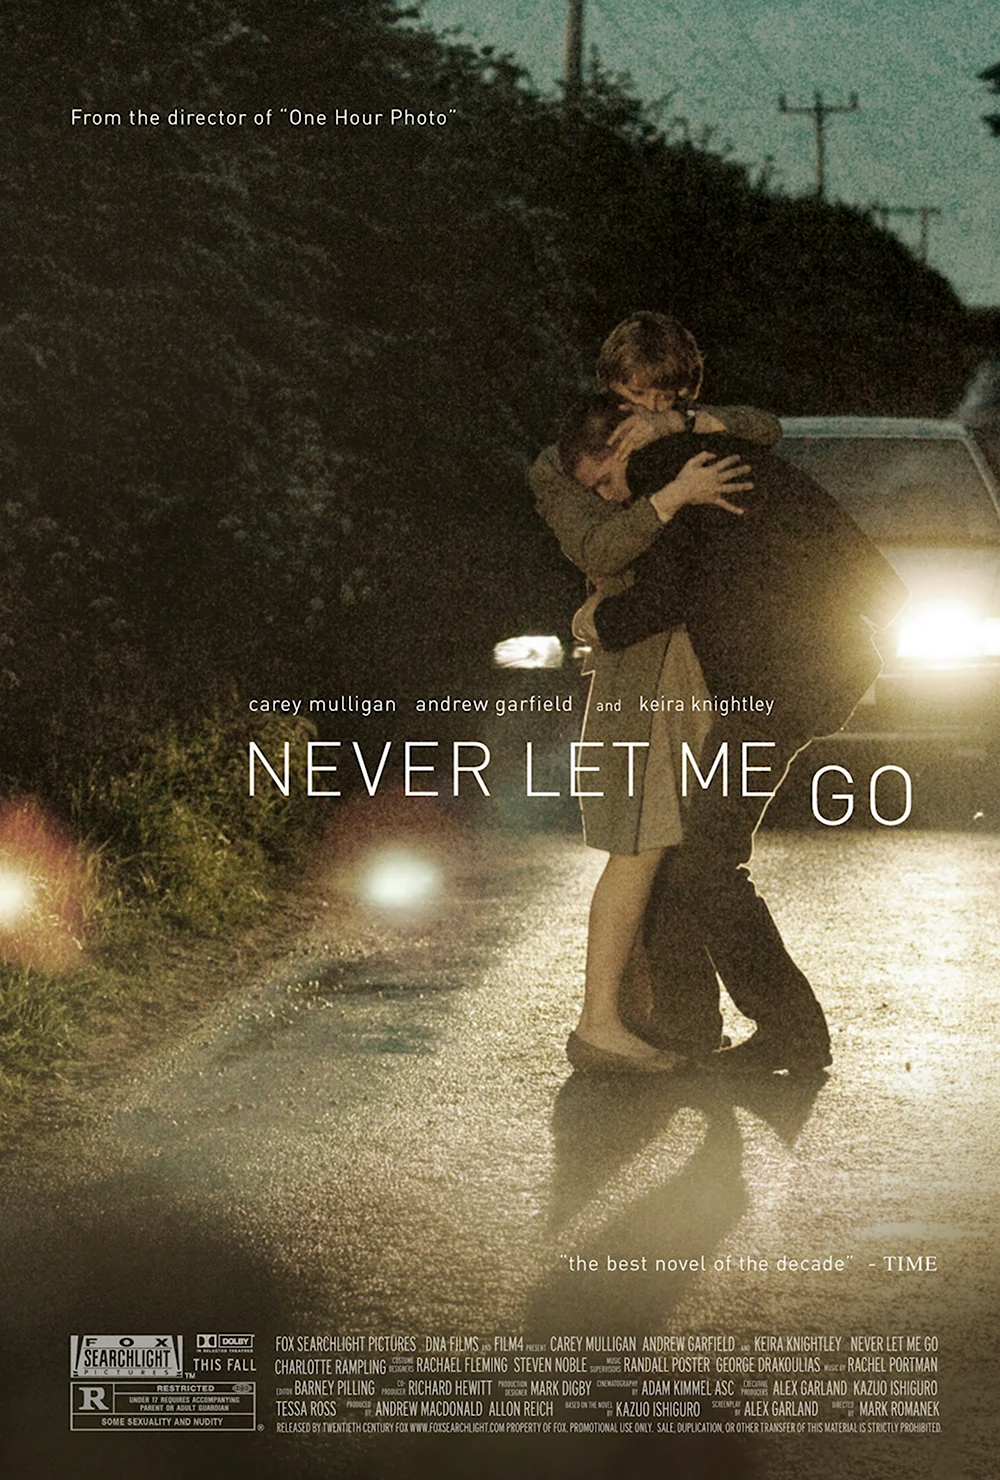 Never Let me go